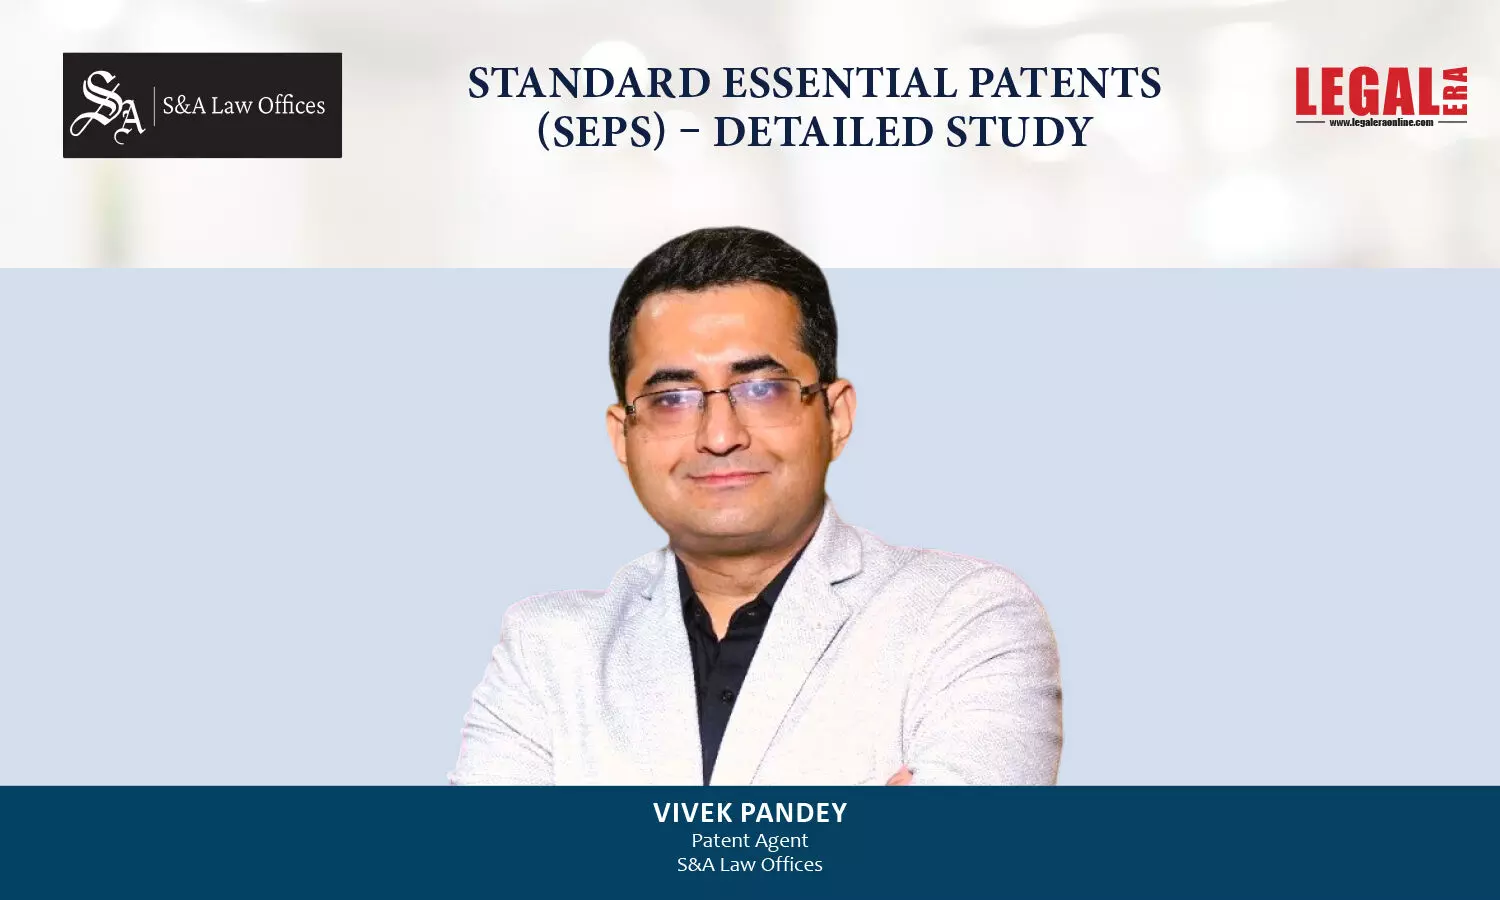 Standard Essential Patents (SEPs) – Detailed Study